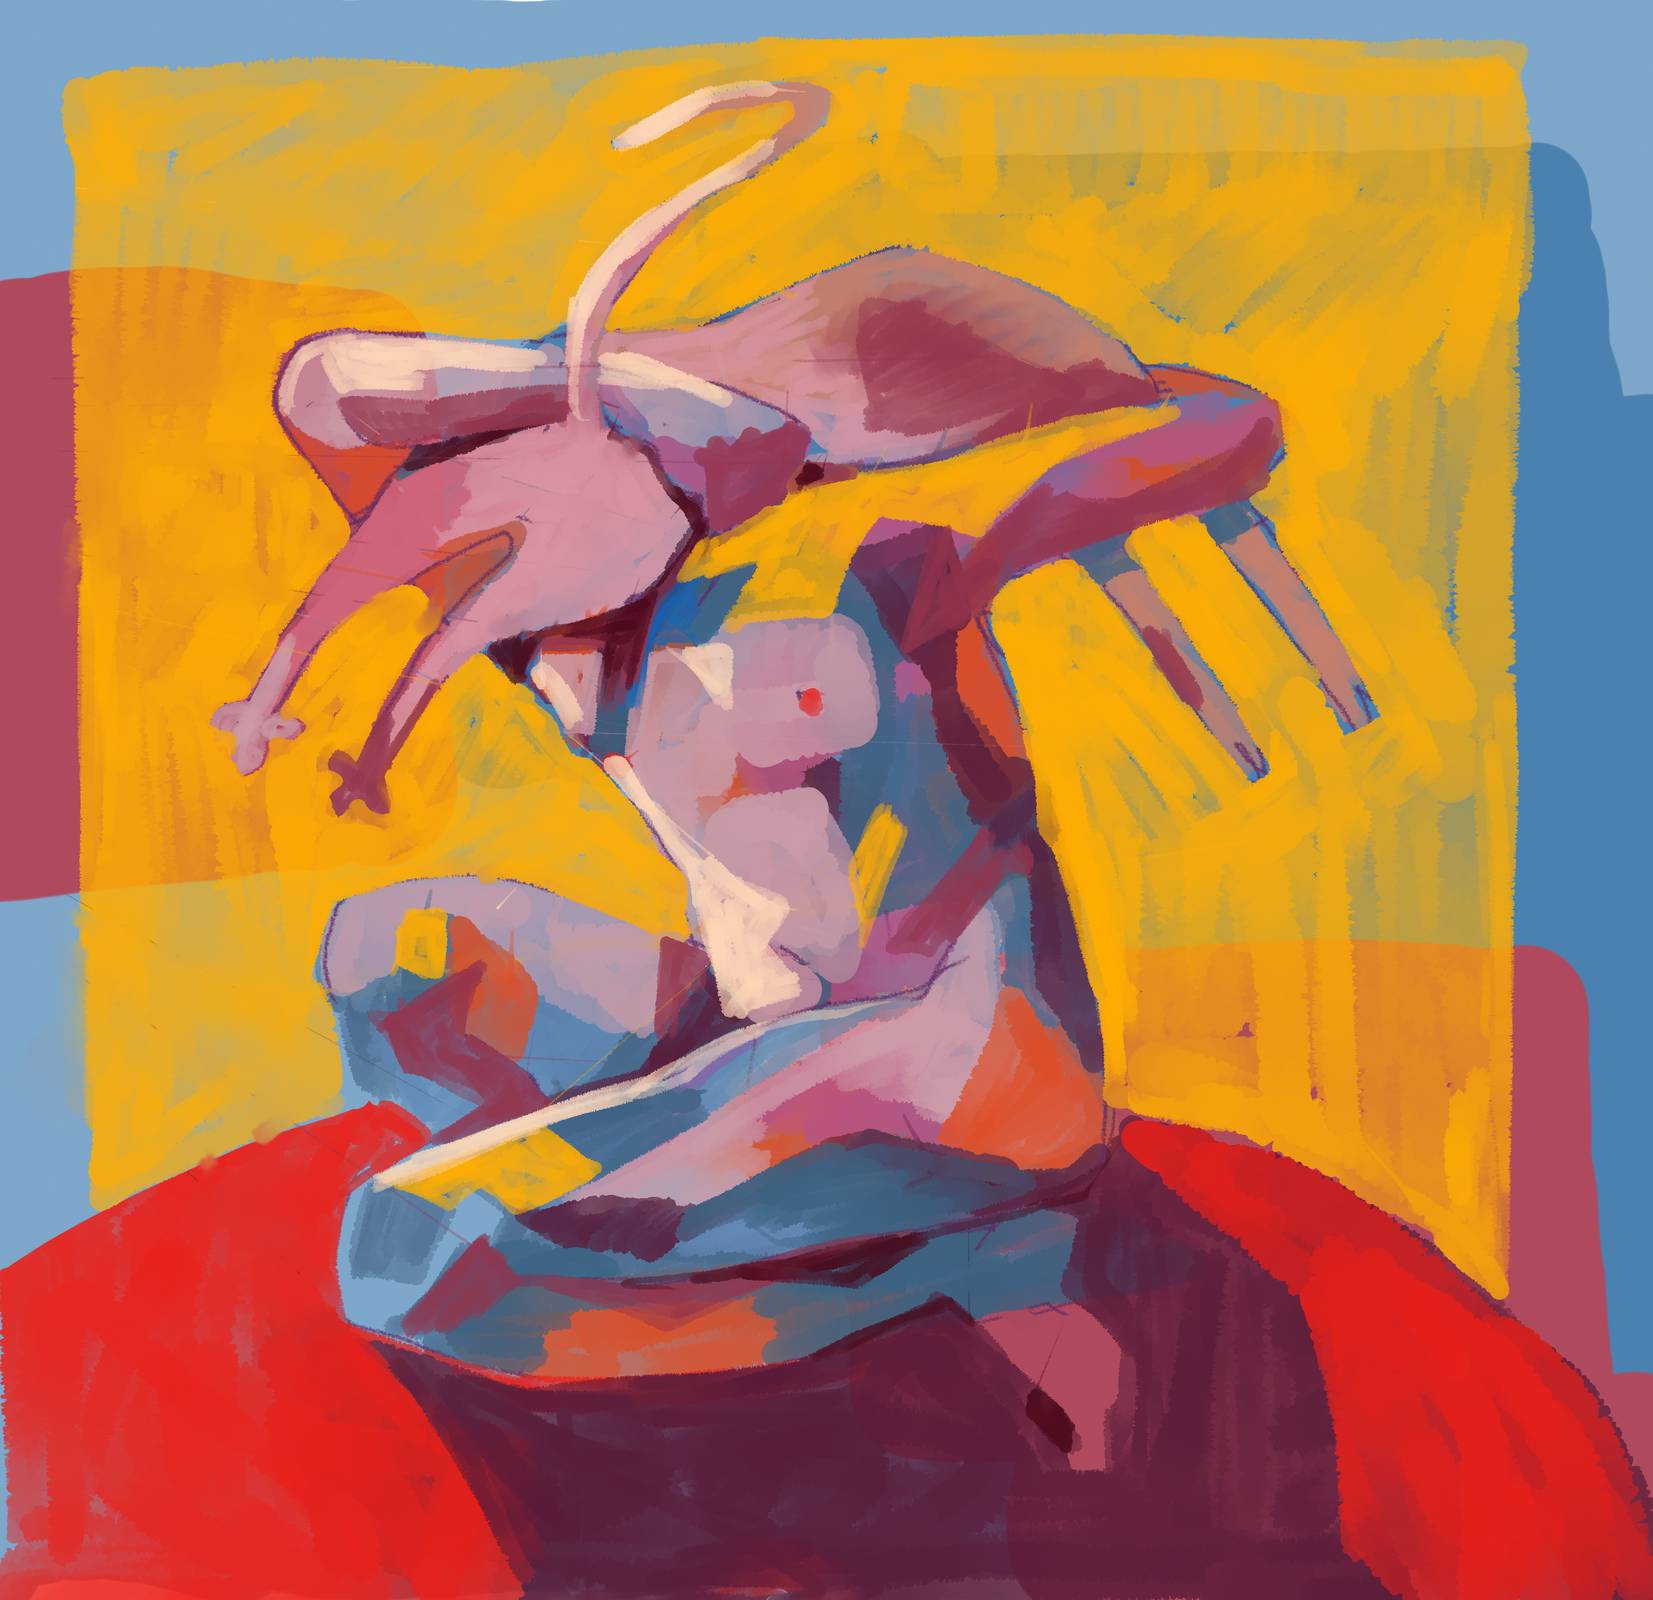 Headless, naked body holding a pink, headles (?) cat over its shoulders. Primary color focus.